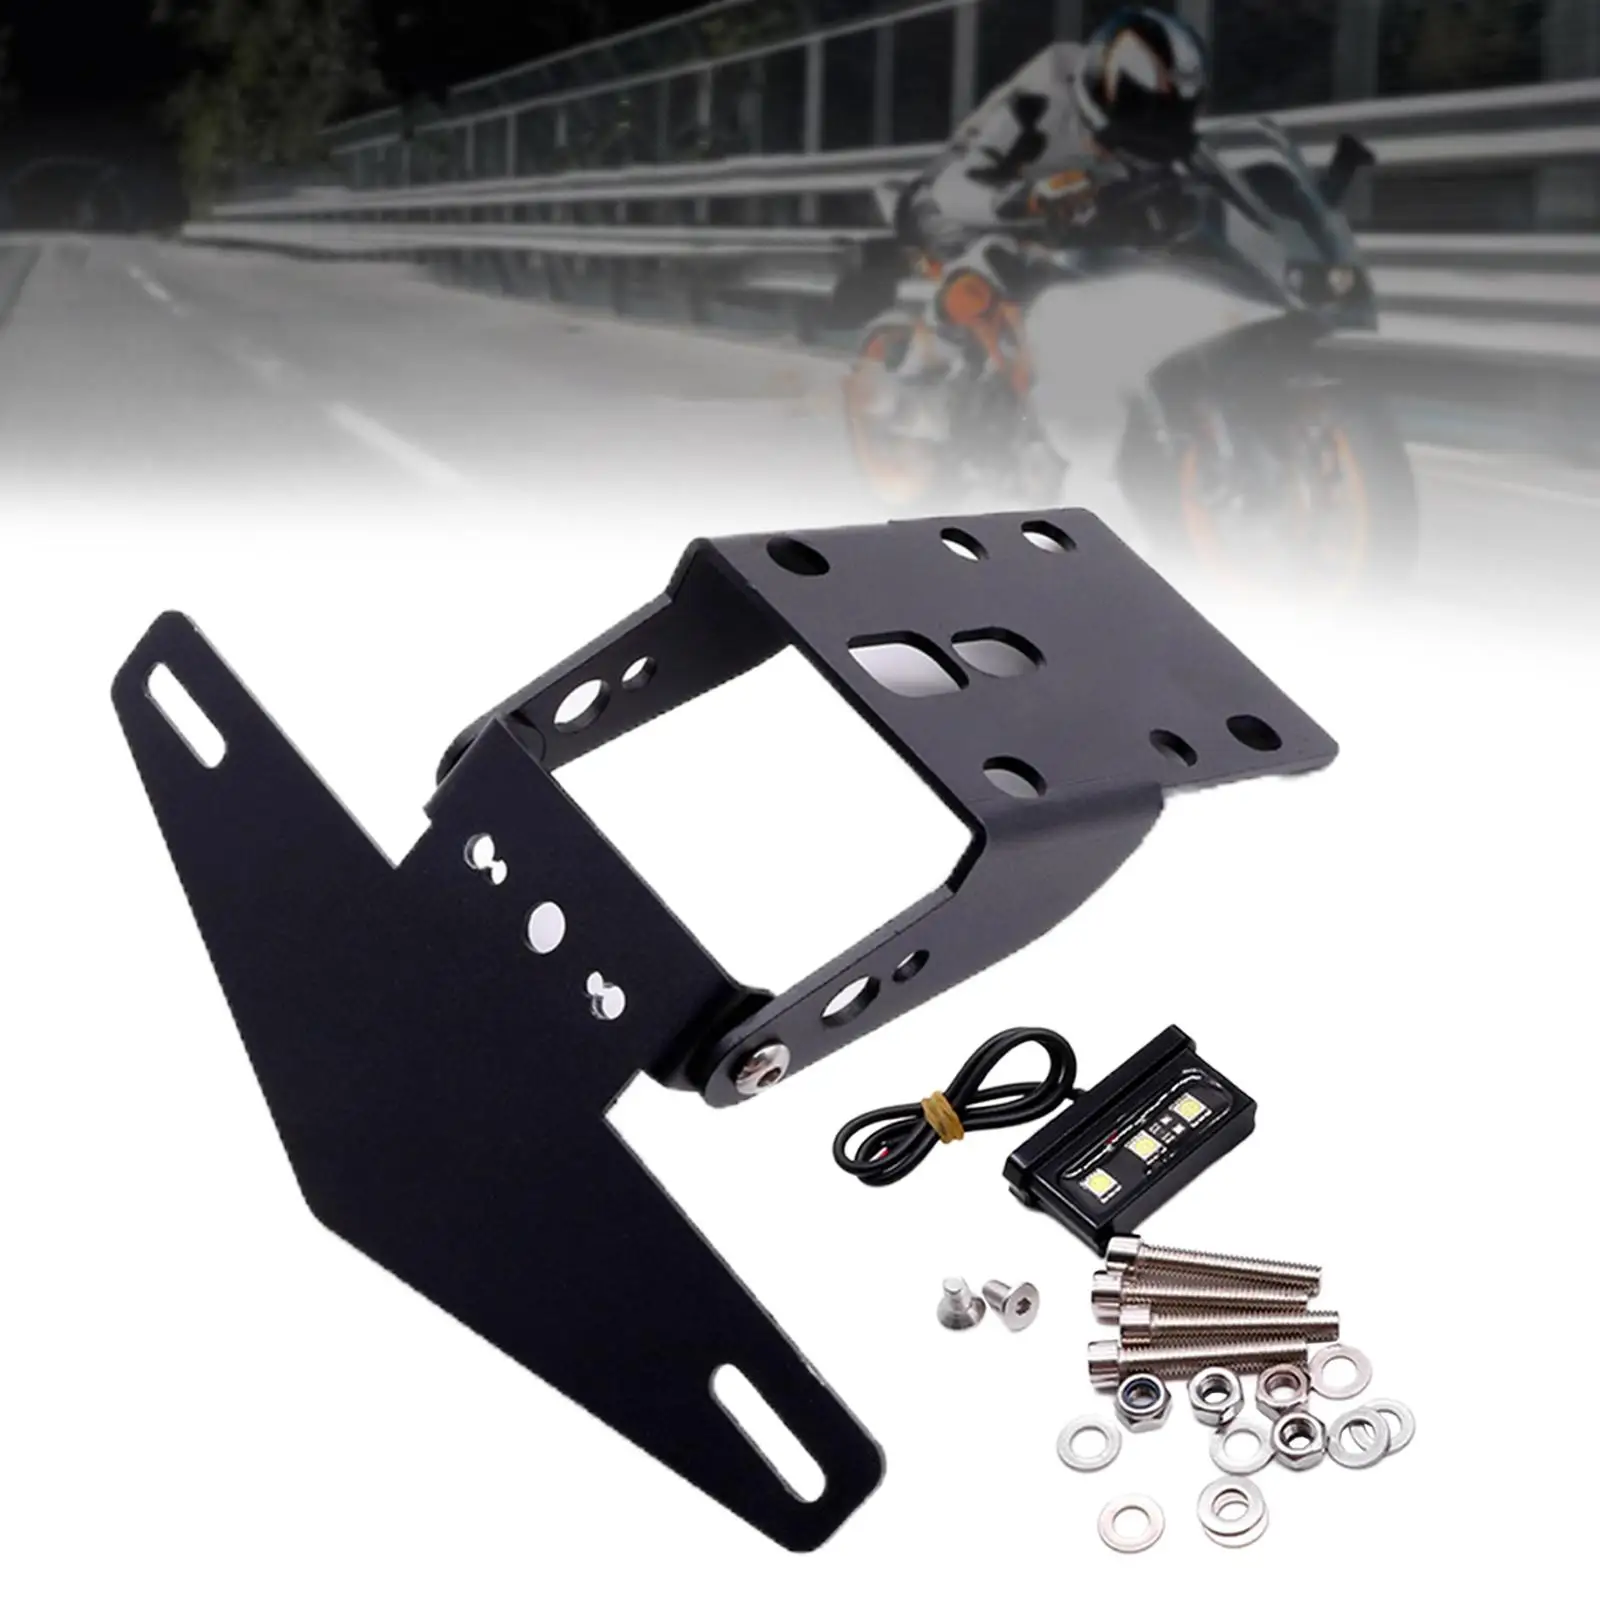 Licence Plate Holder for  125 250 390 Tail Tidy with LED Light Black